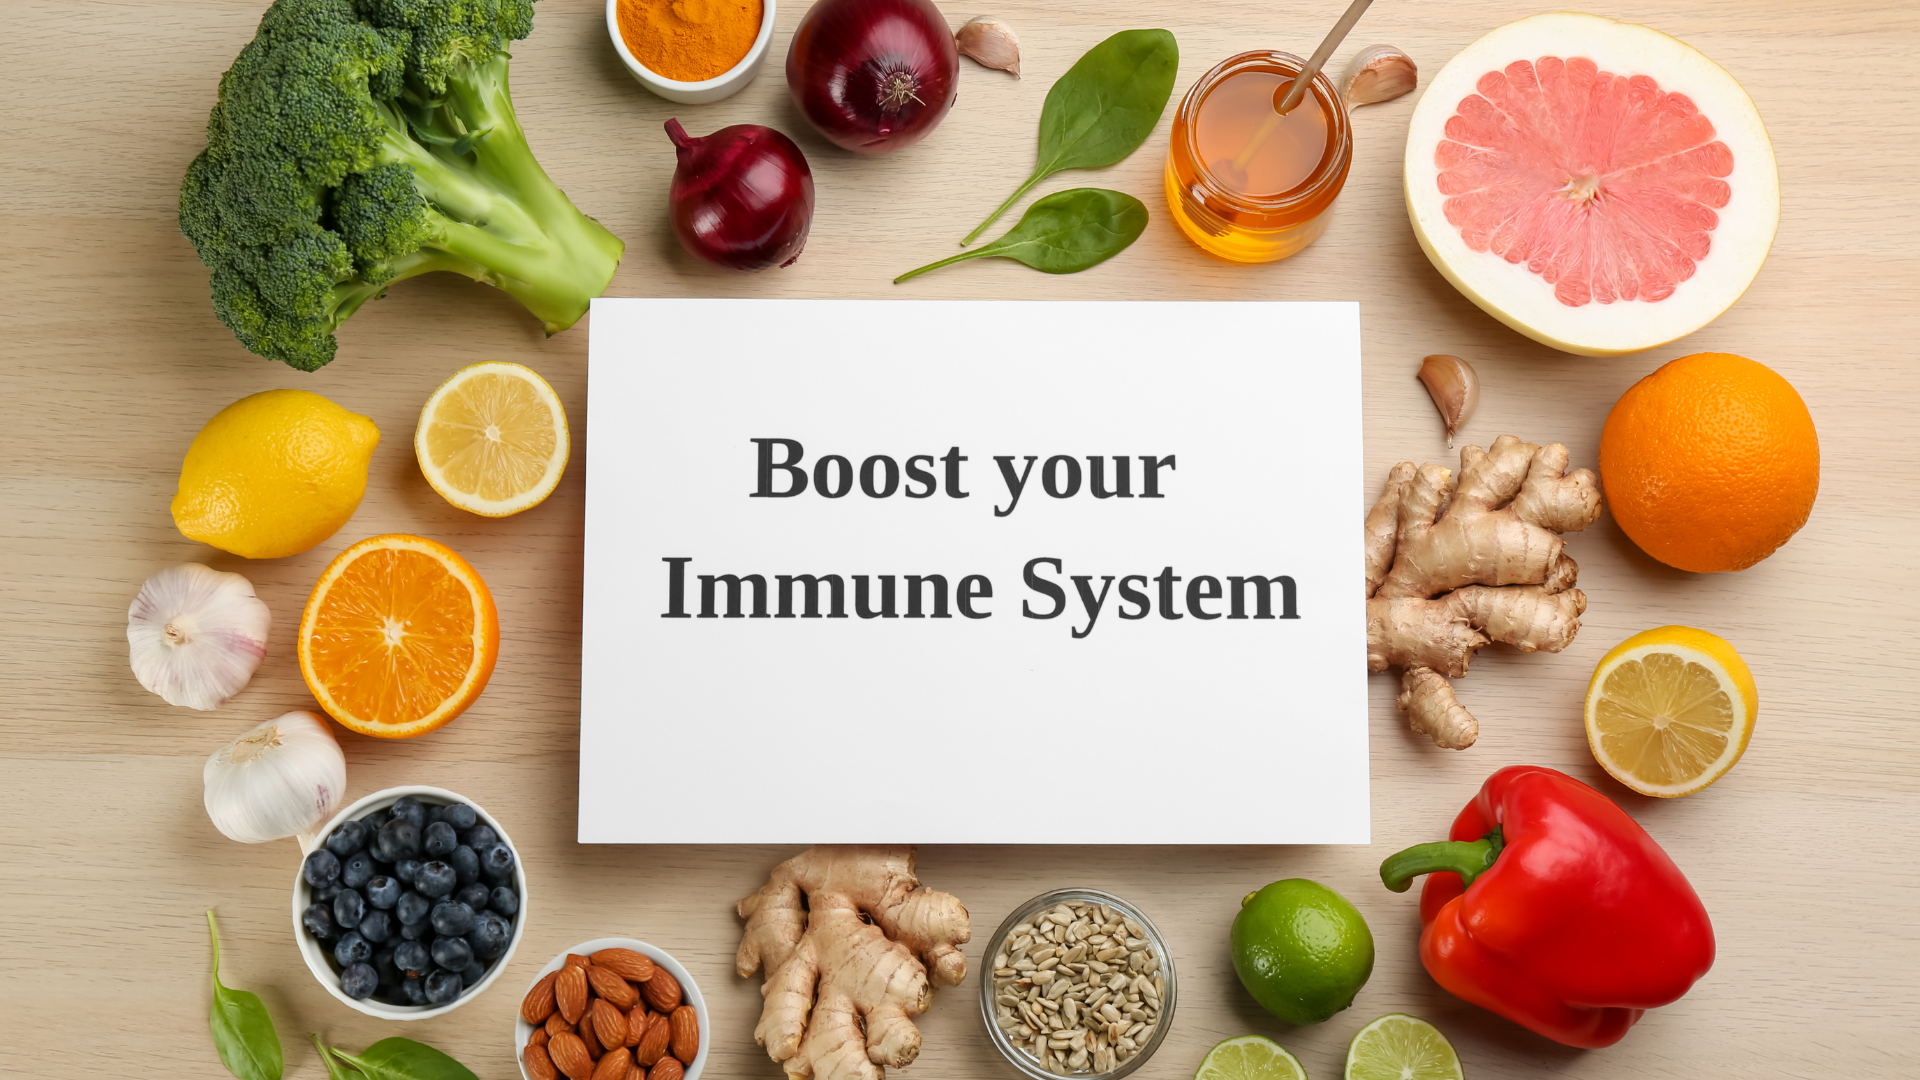 Boost Your Immunity Naturally: DIY Home Remedies